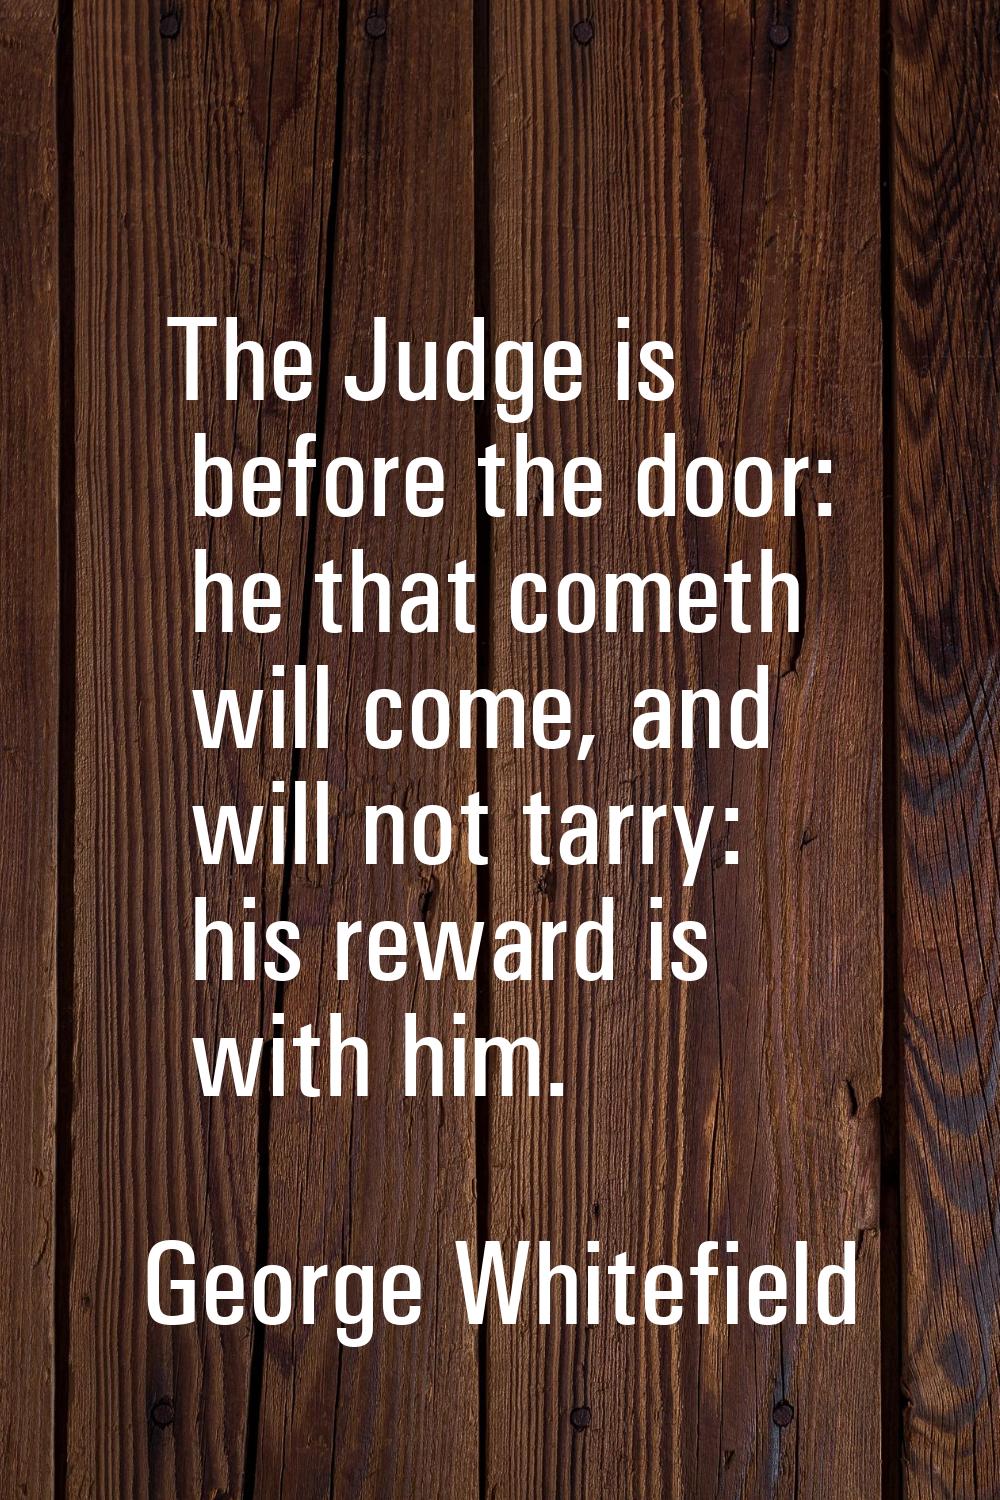 The Judge is before the door: he that cometh will come, and will not tarry: his reward is with him.